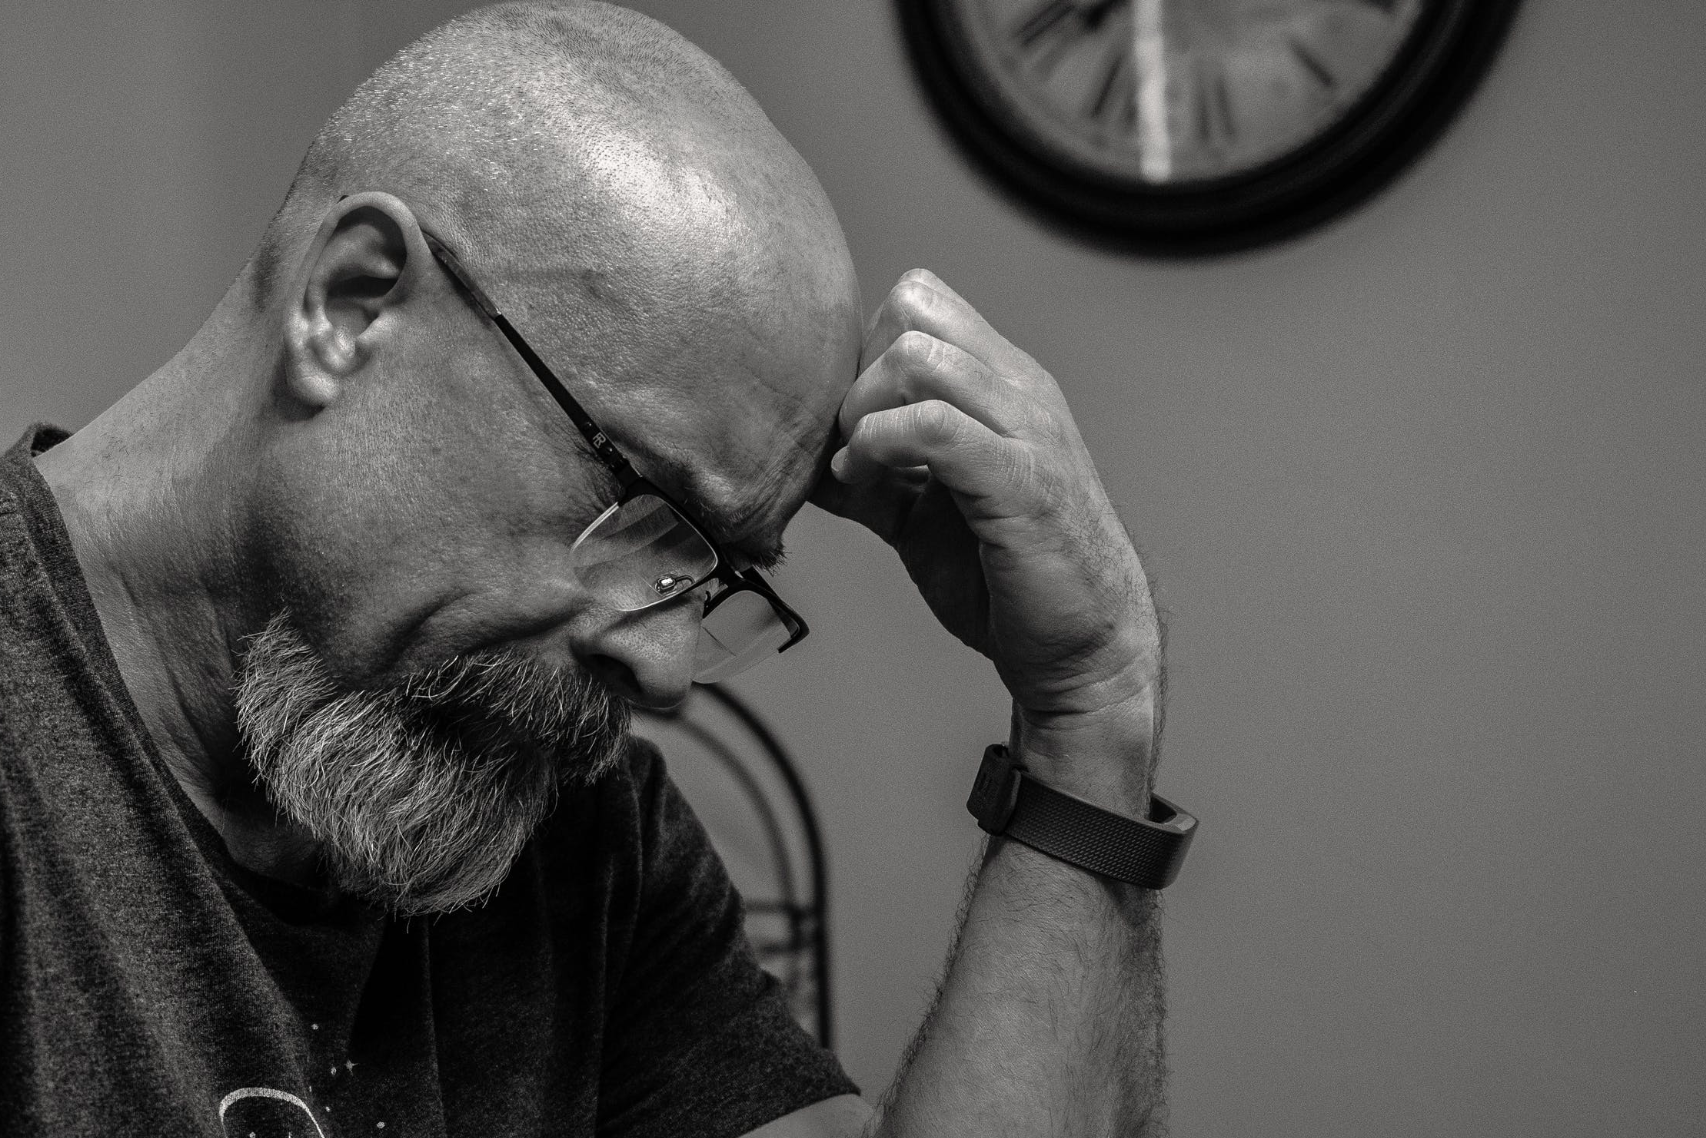 A bald man frowns and looks down at a table, wearing a dark tee-shirt. The picture is in black and white